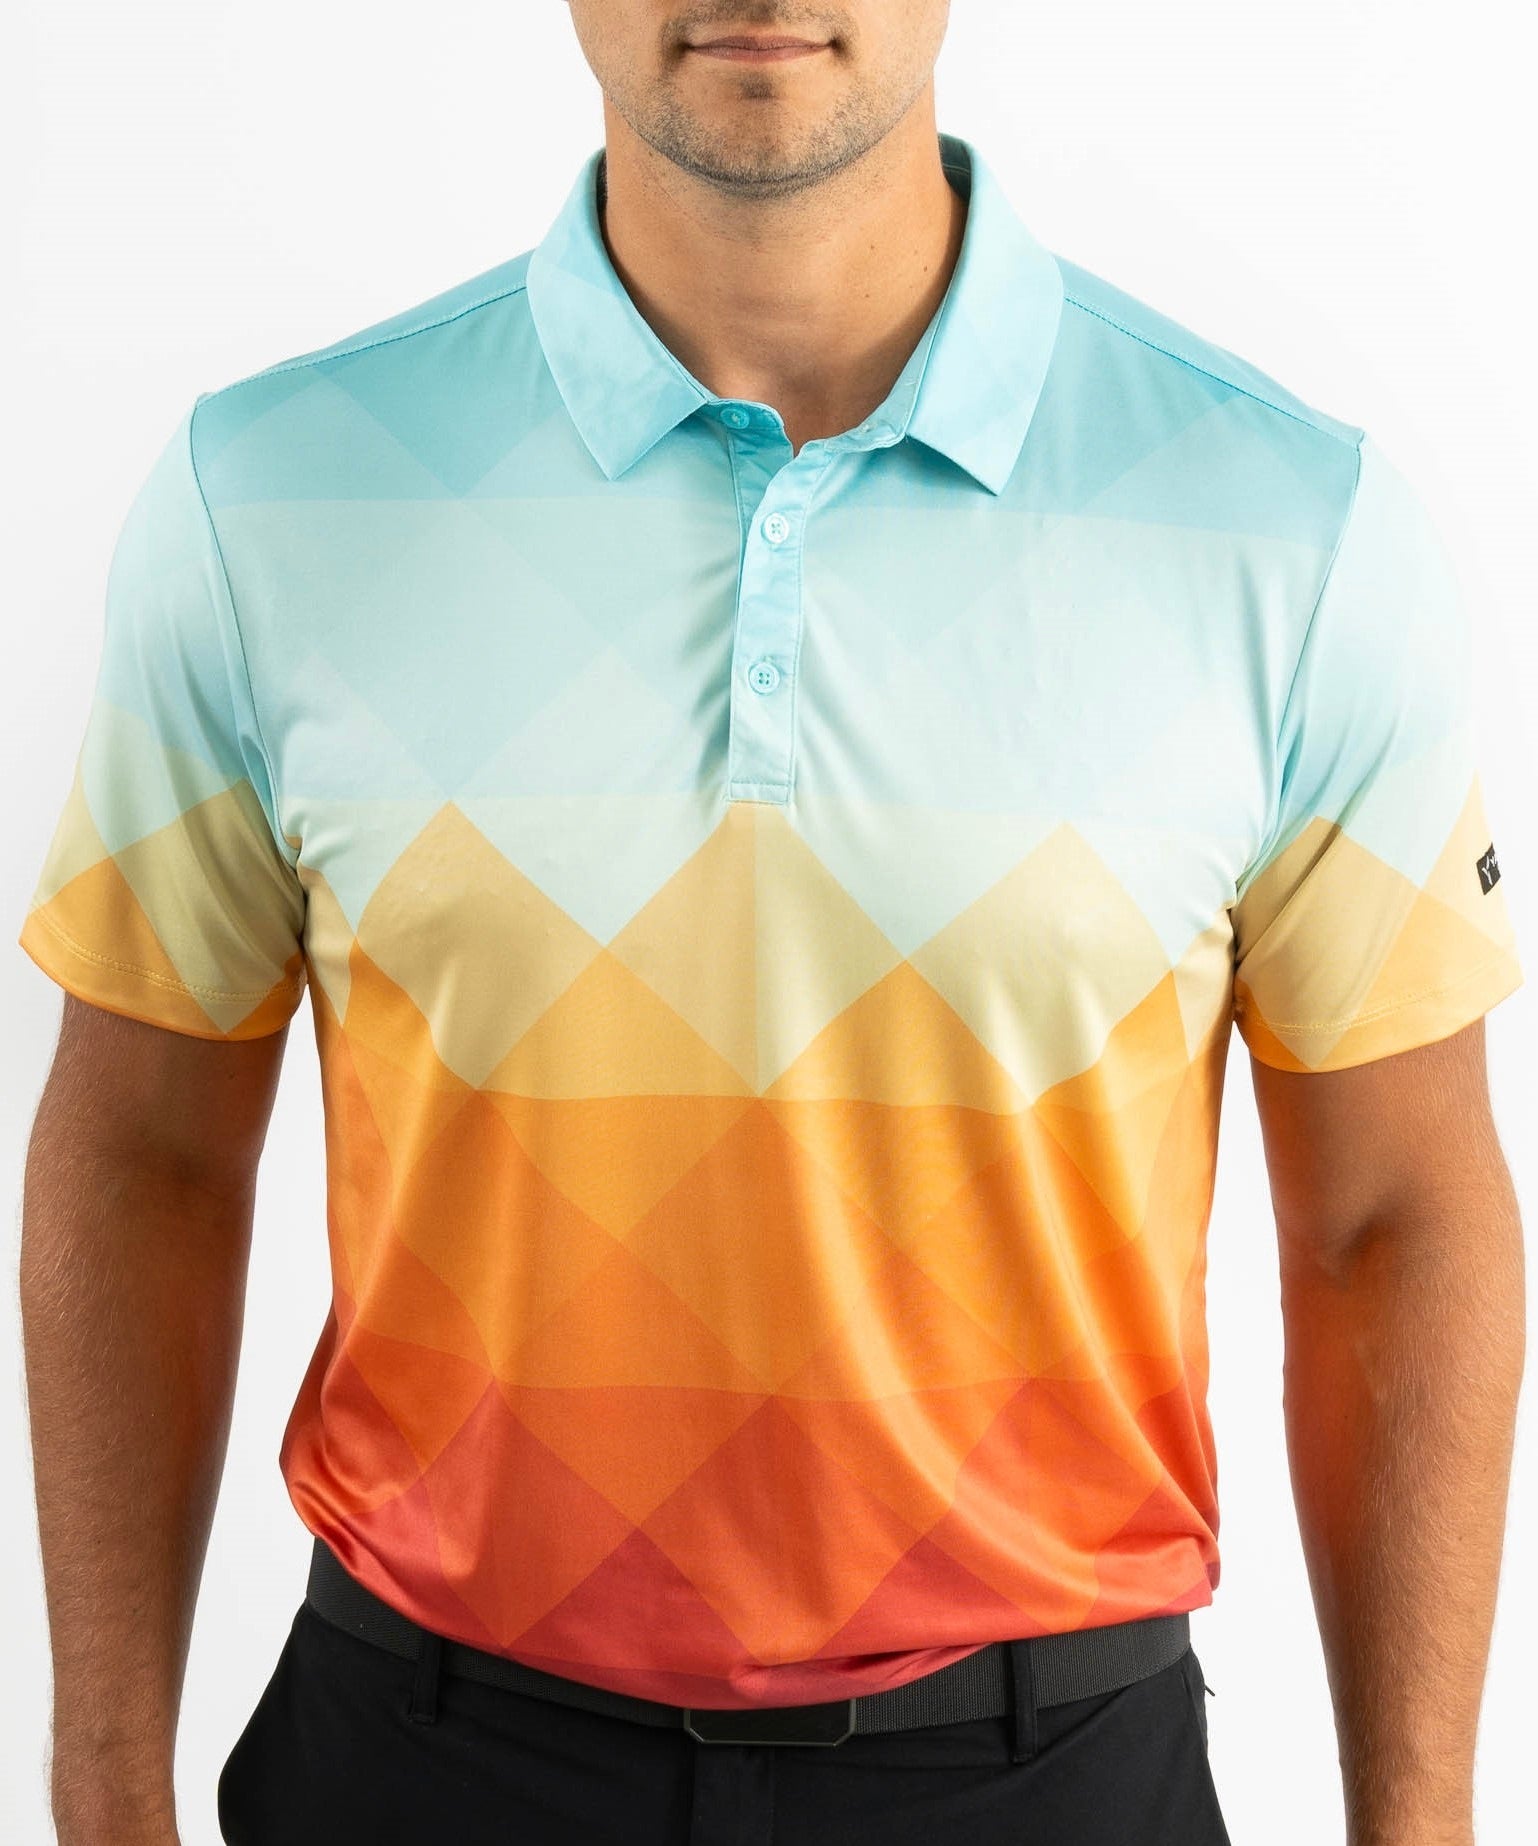 Mens Sunset Polo - Sunset. – Polos. Yatta Seriously Only $39.95. Great Golf Arizona